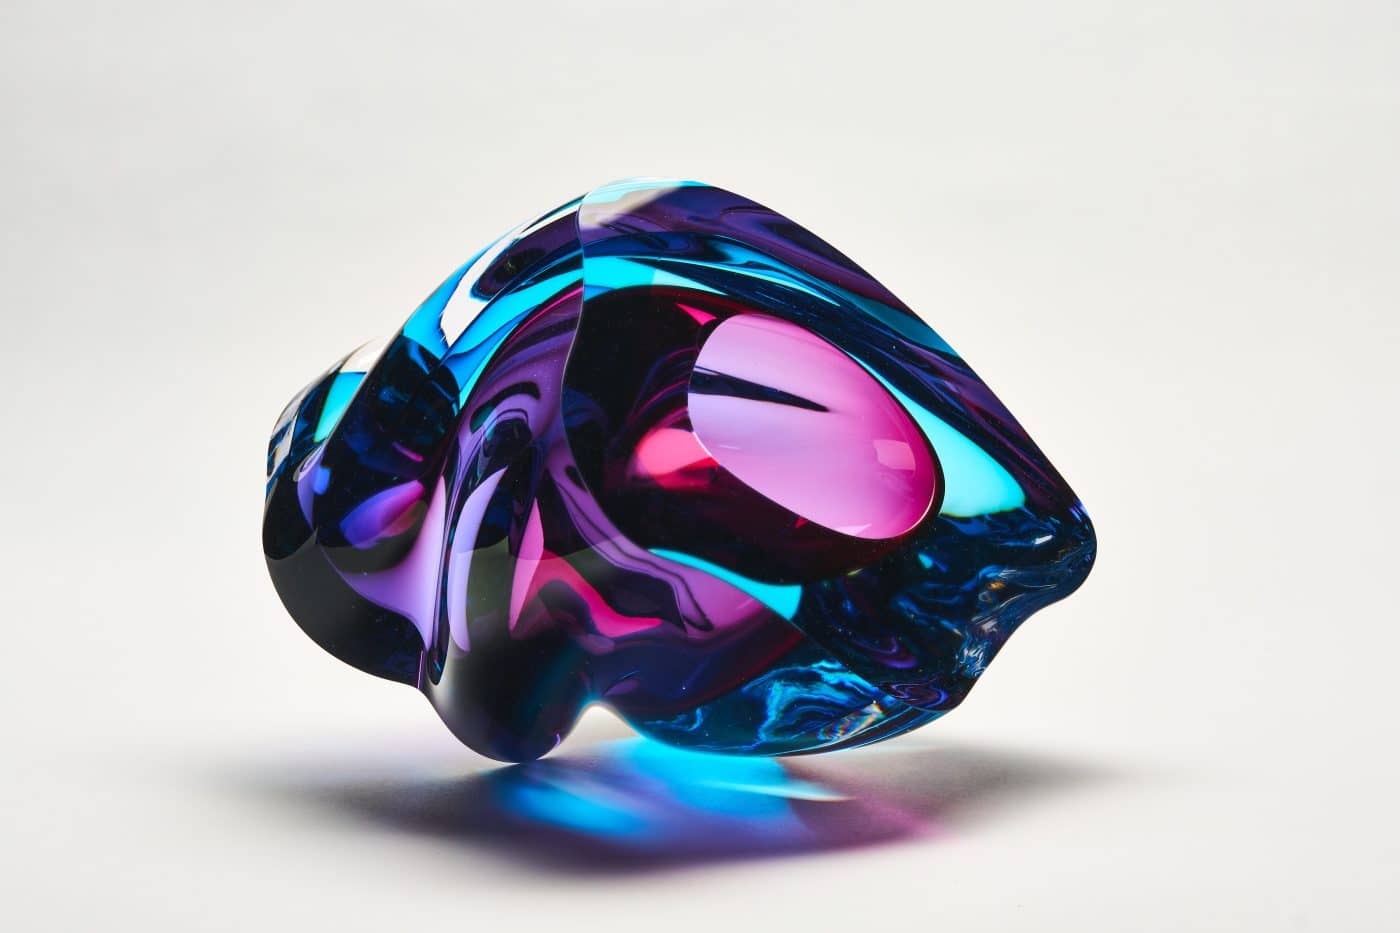 Blue and purple glass sculpture by Tim Rawlinson